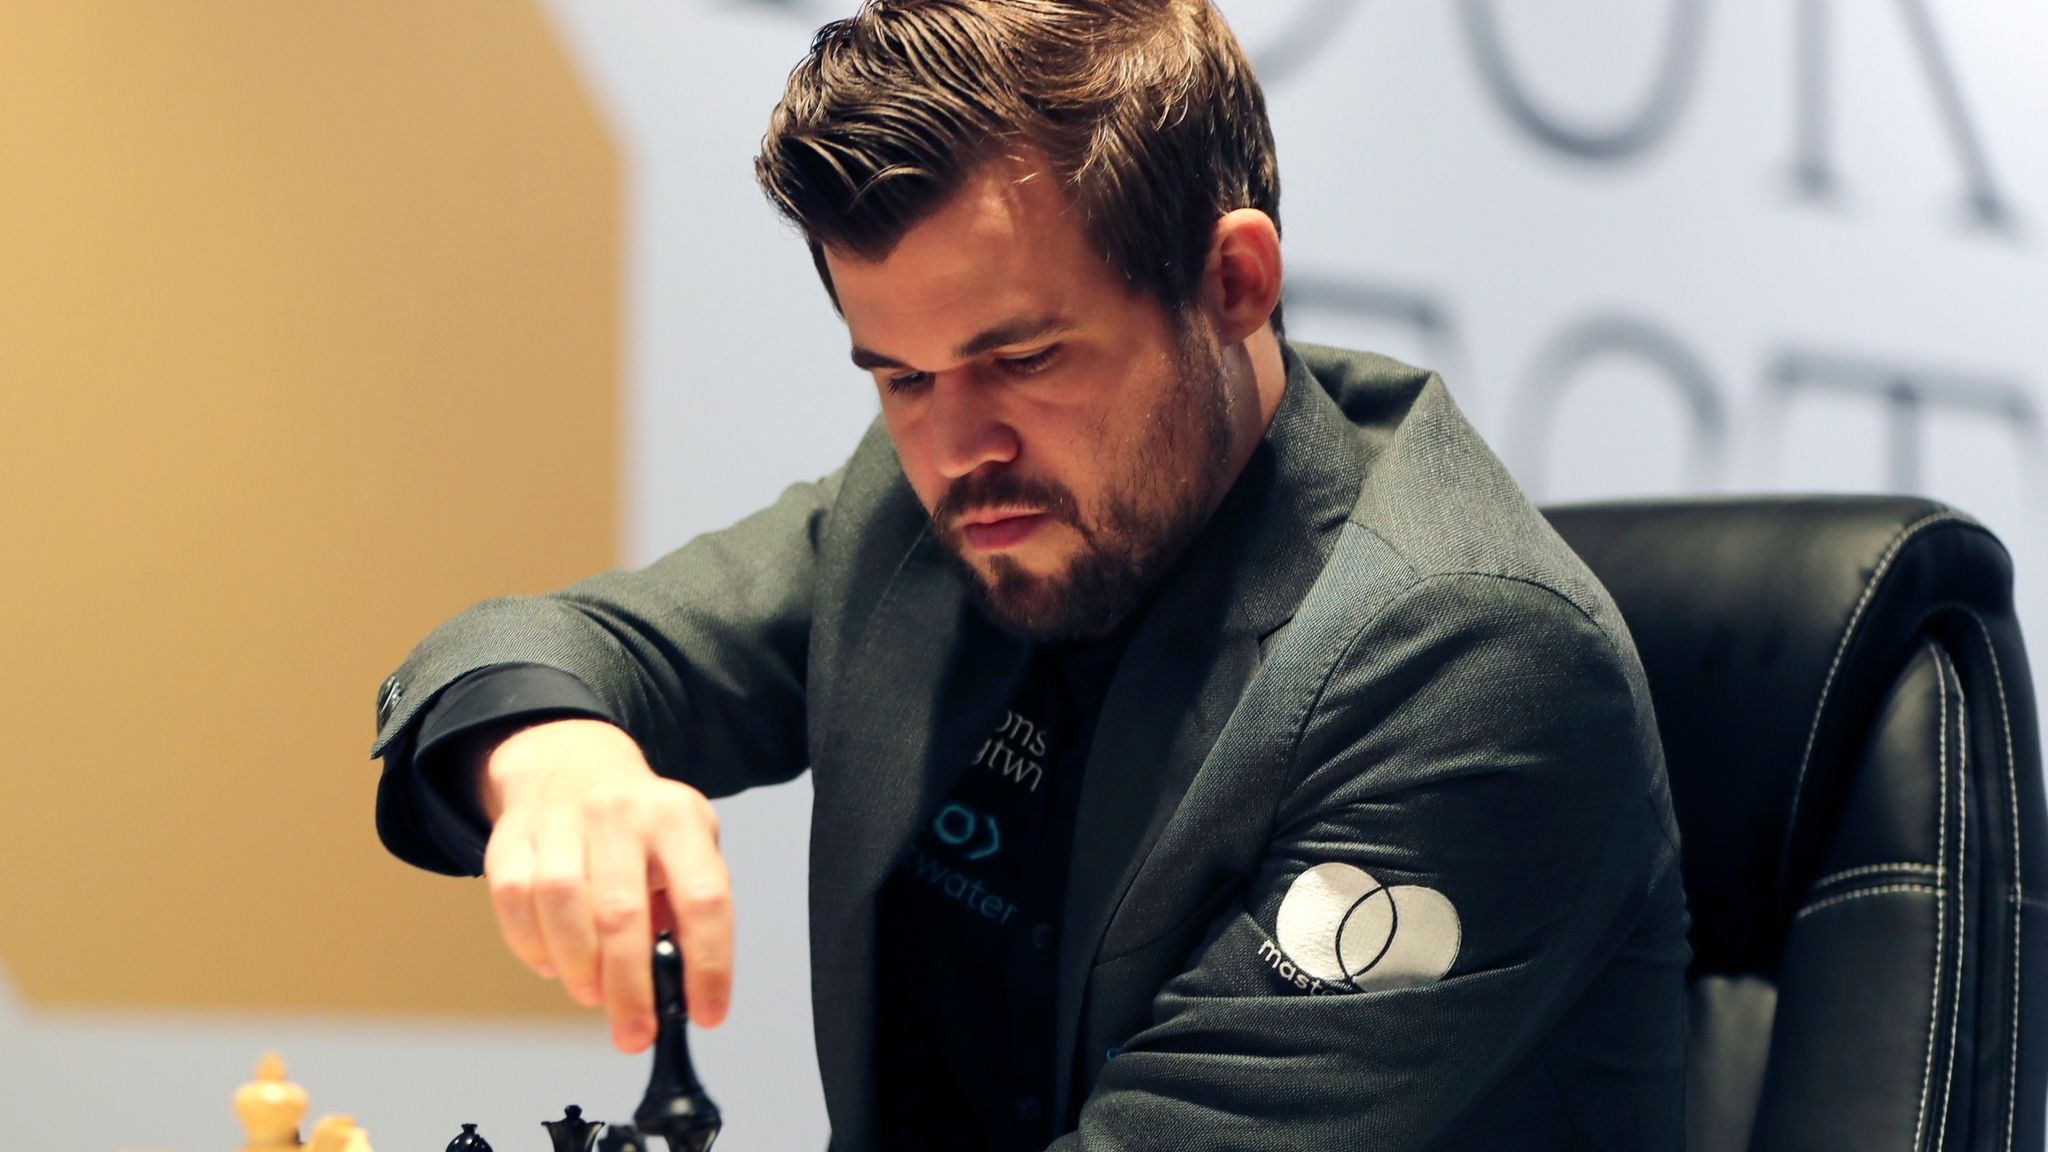 I believe Niemann has cheated more': World Champion Magnus Carlsen says in  a statement